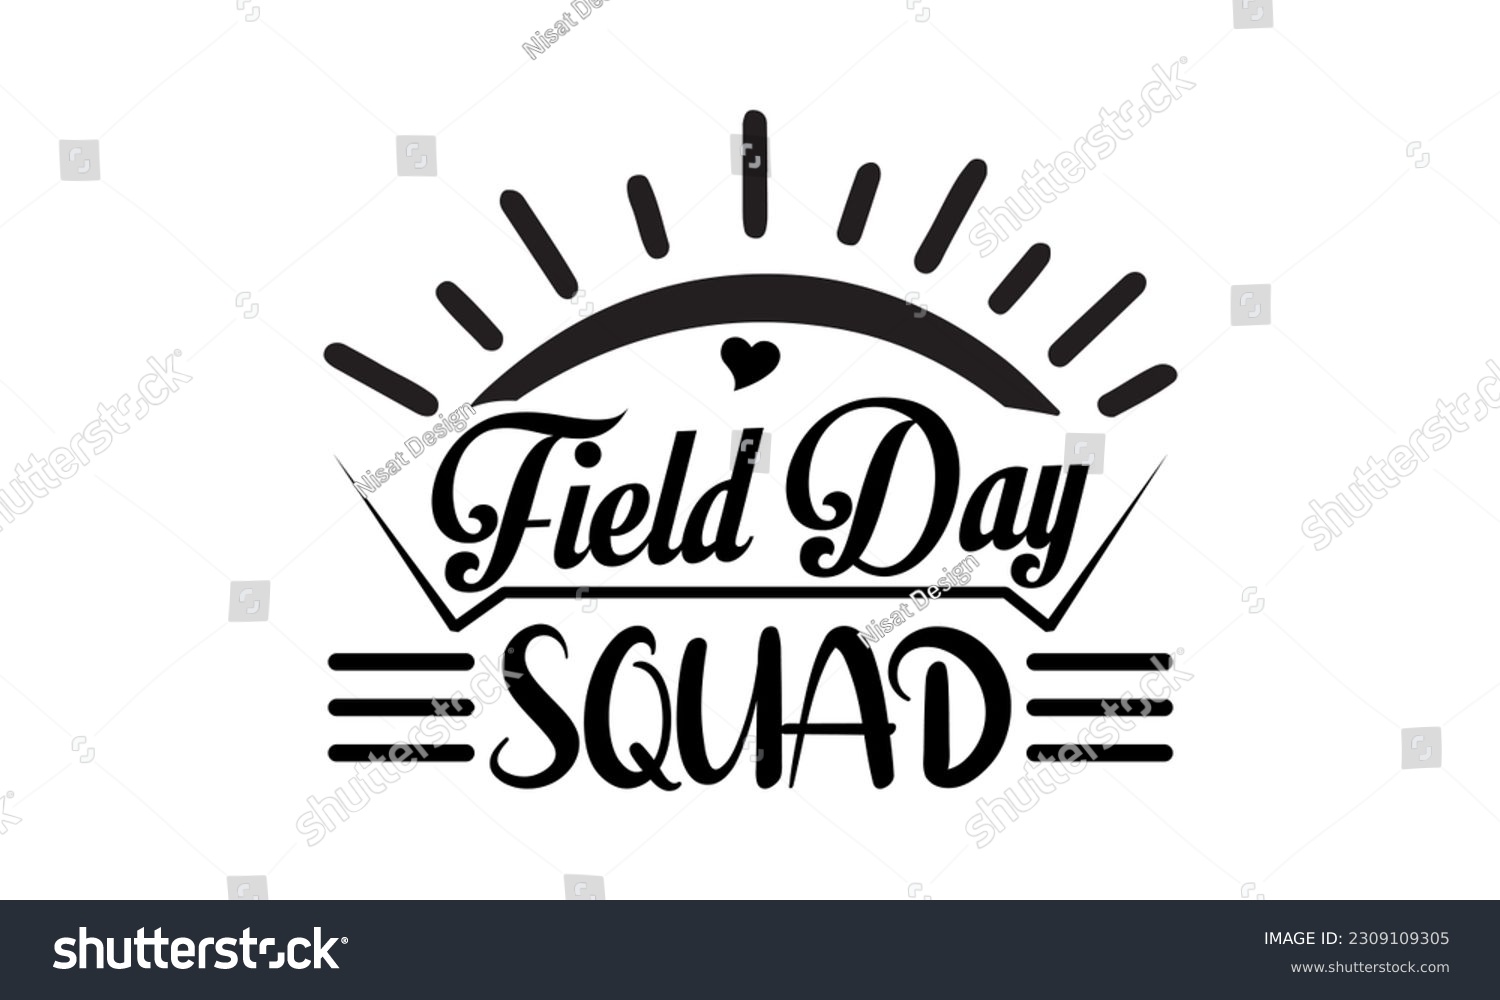 SVG of Field day Squad - Field day Vector And Clip Art svg